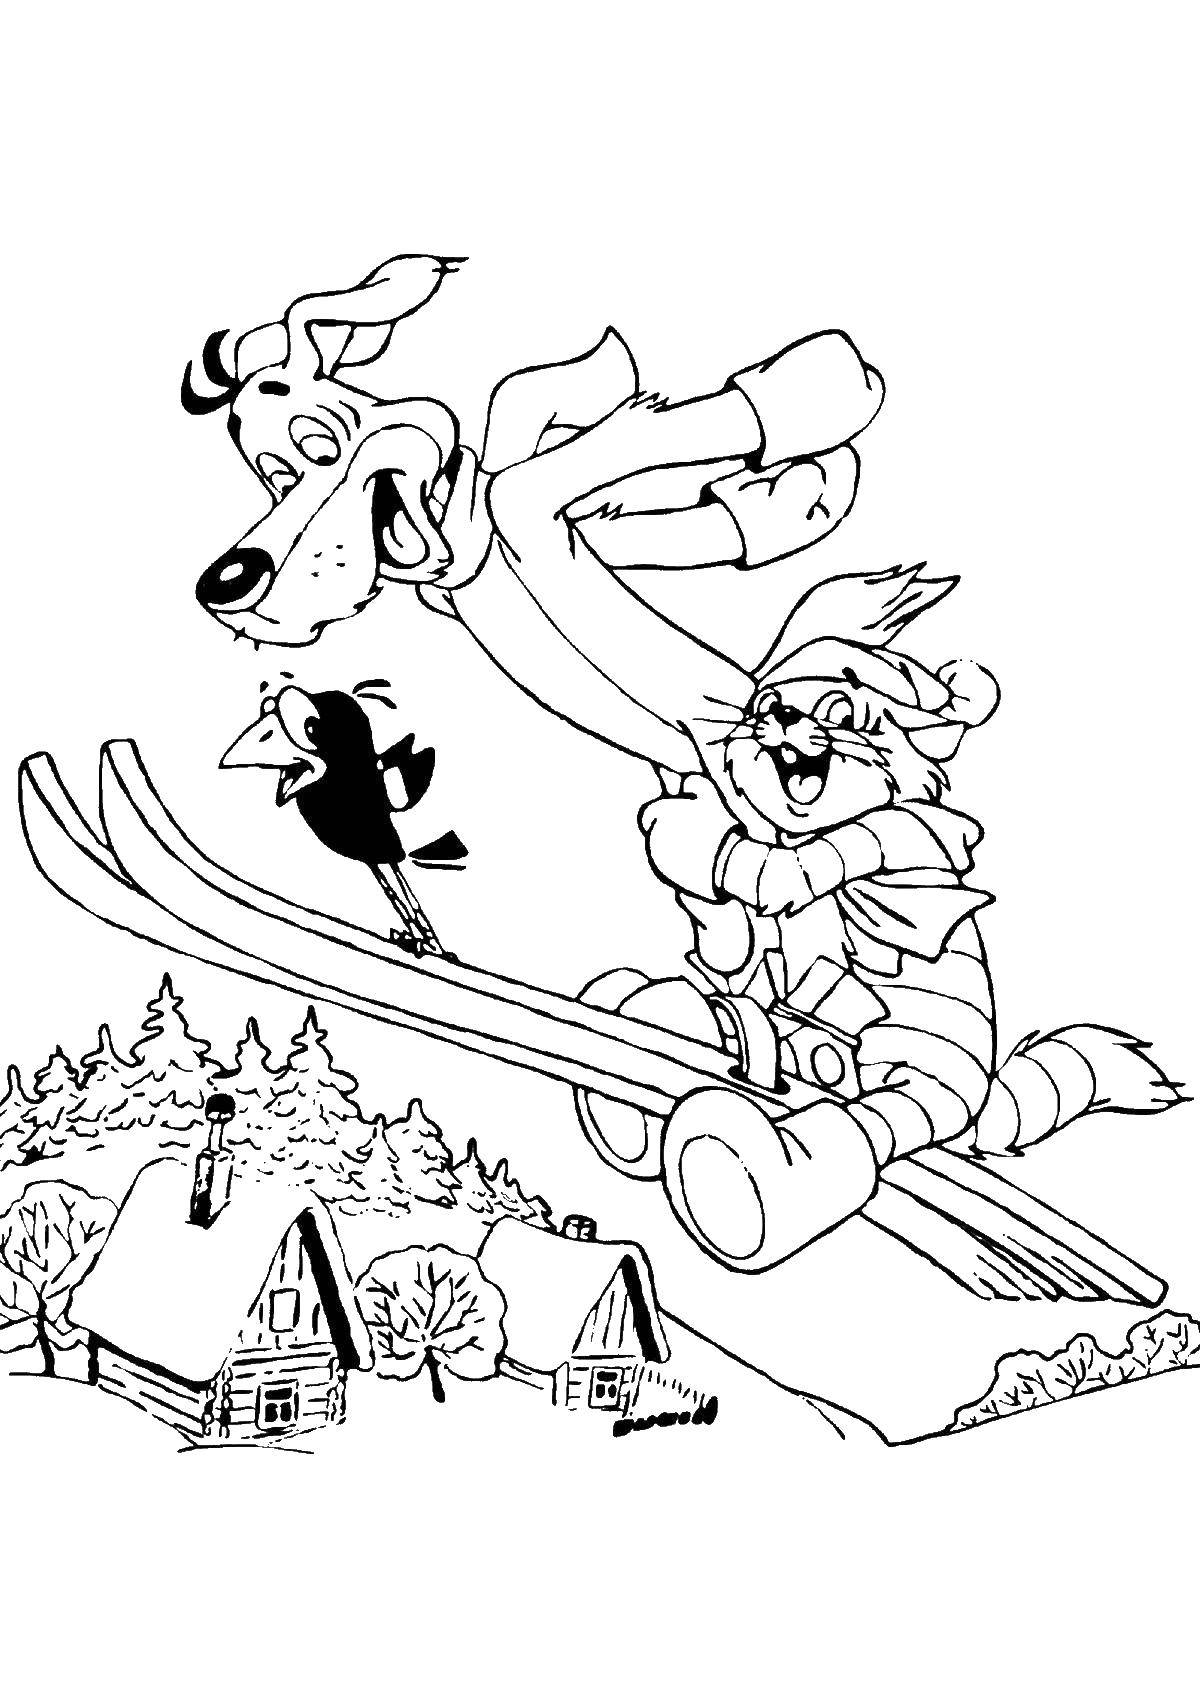 Coloring Winter in buttermilk . Category coloring, buttermilk. Tags:  Cartoon character, Buttermilk .